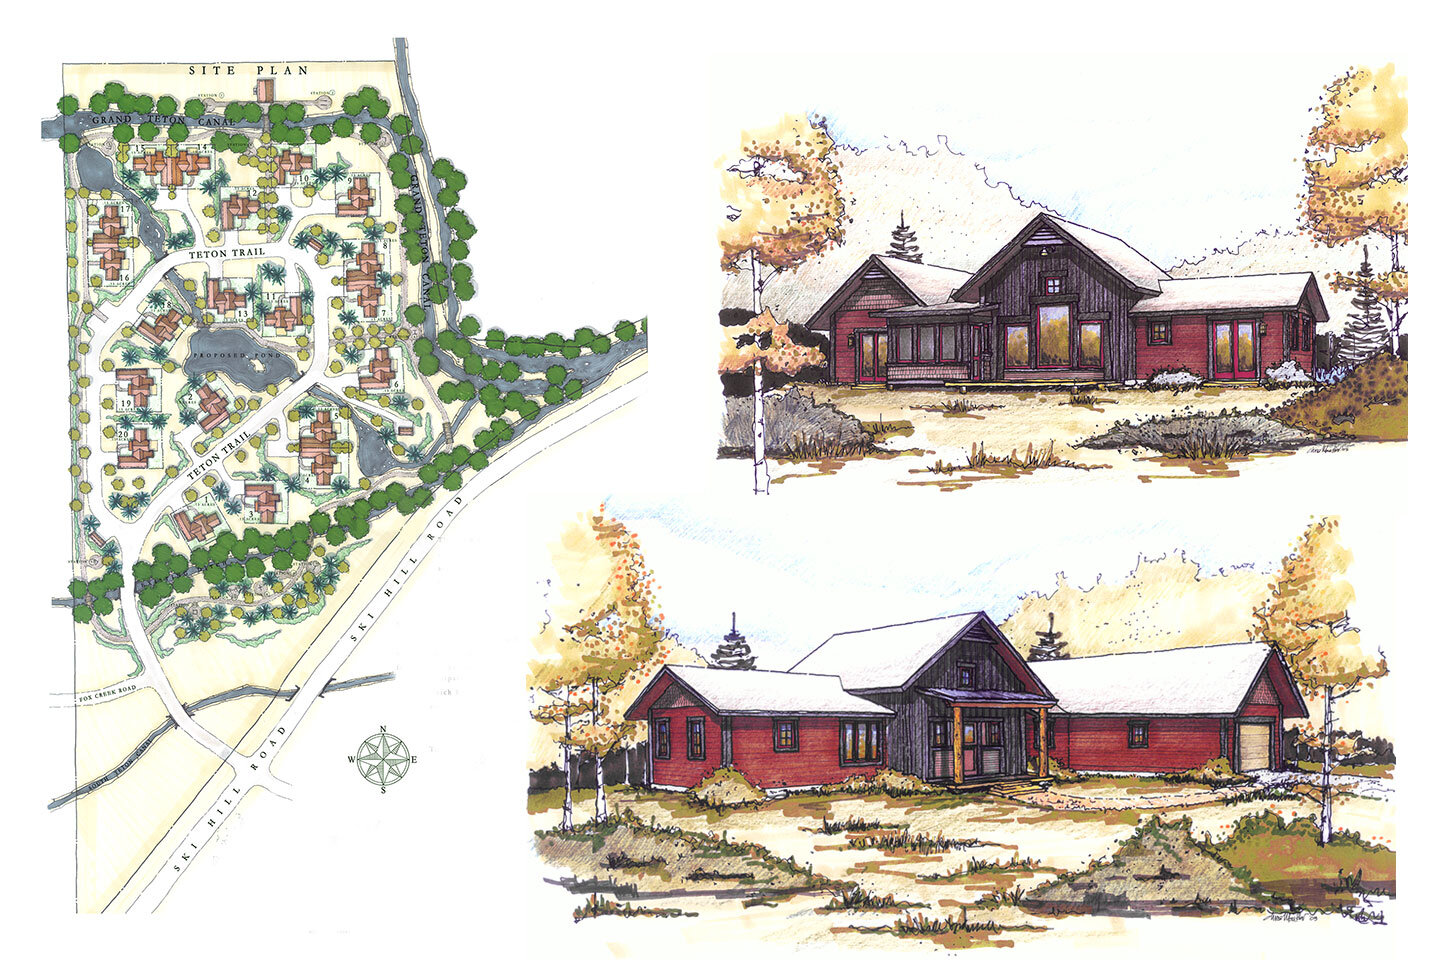 Master plan view and two sketches of townhome